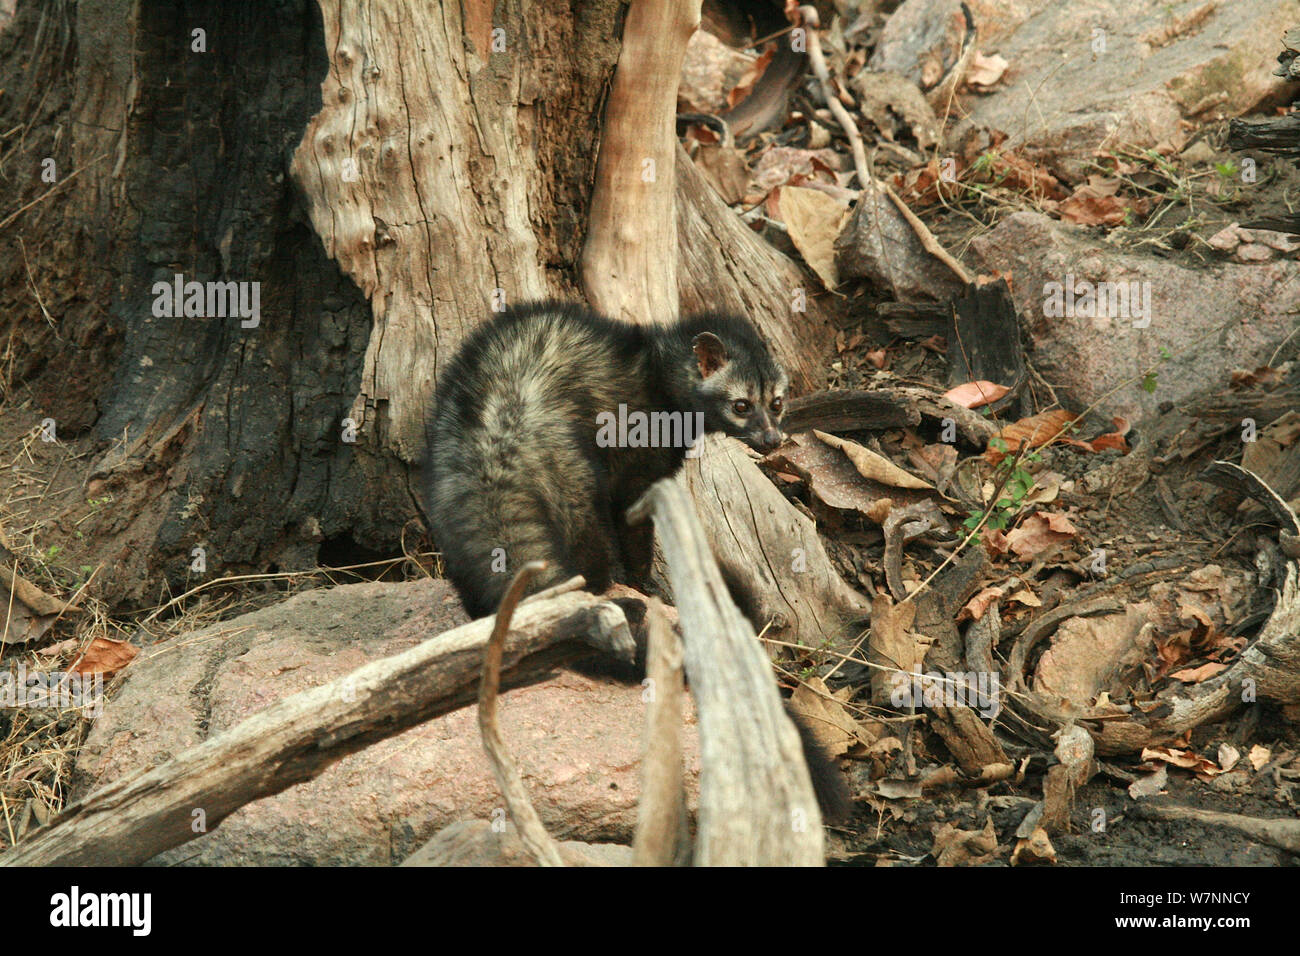 Asian palm civet (Paradoxurus hermaphroditus) taken on location for 'Tiger - Spy in the Jungle' March 2007 Stock Photo